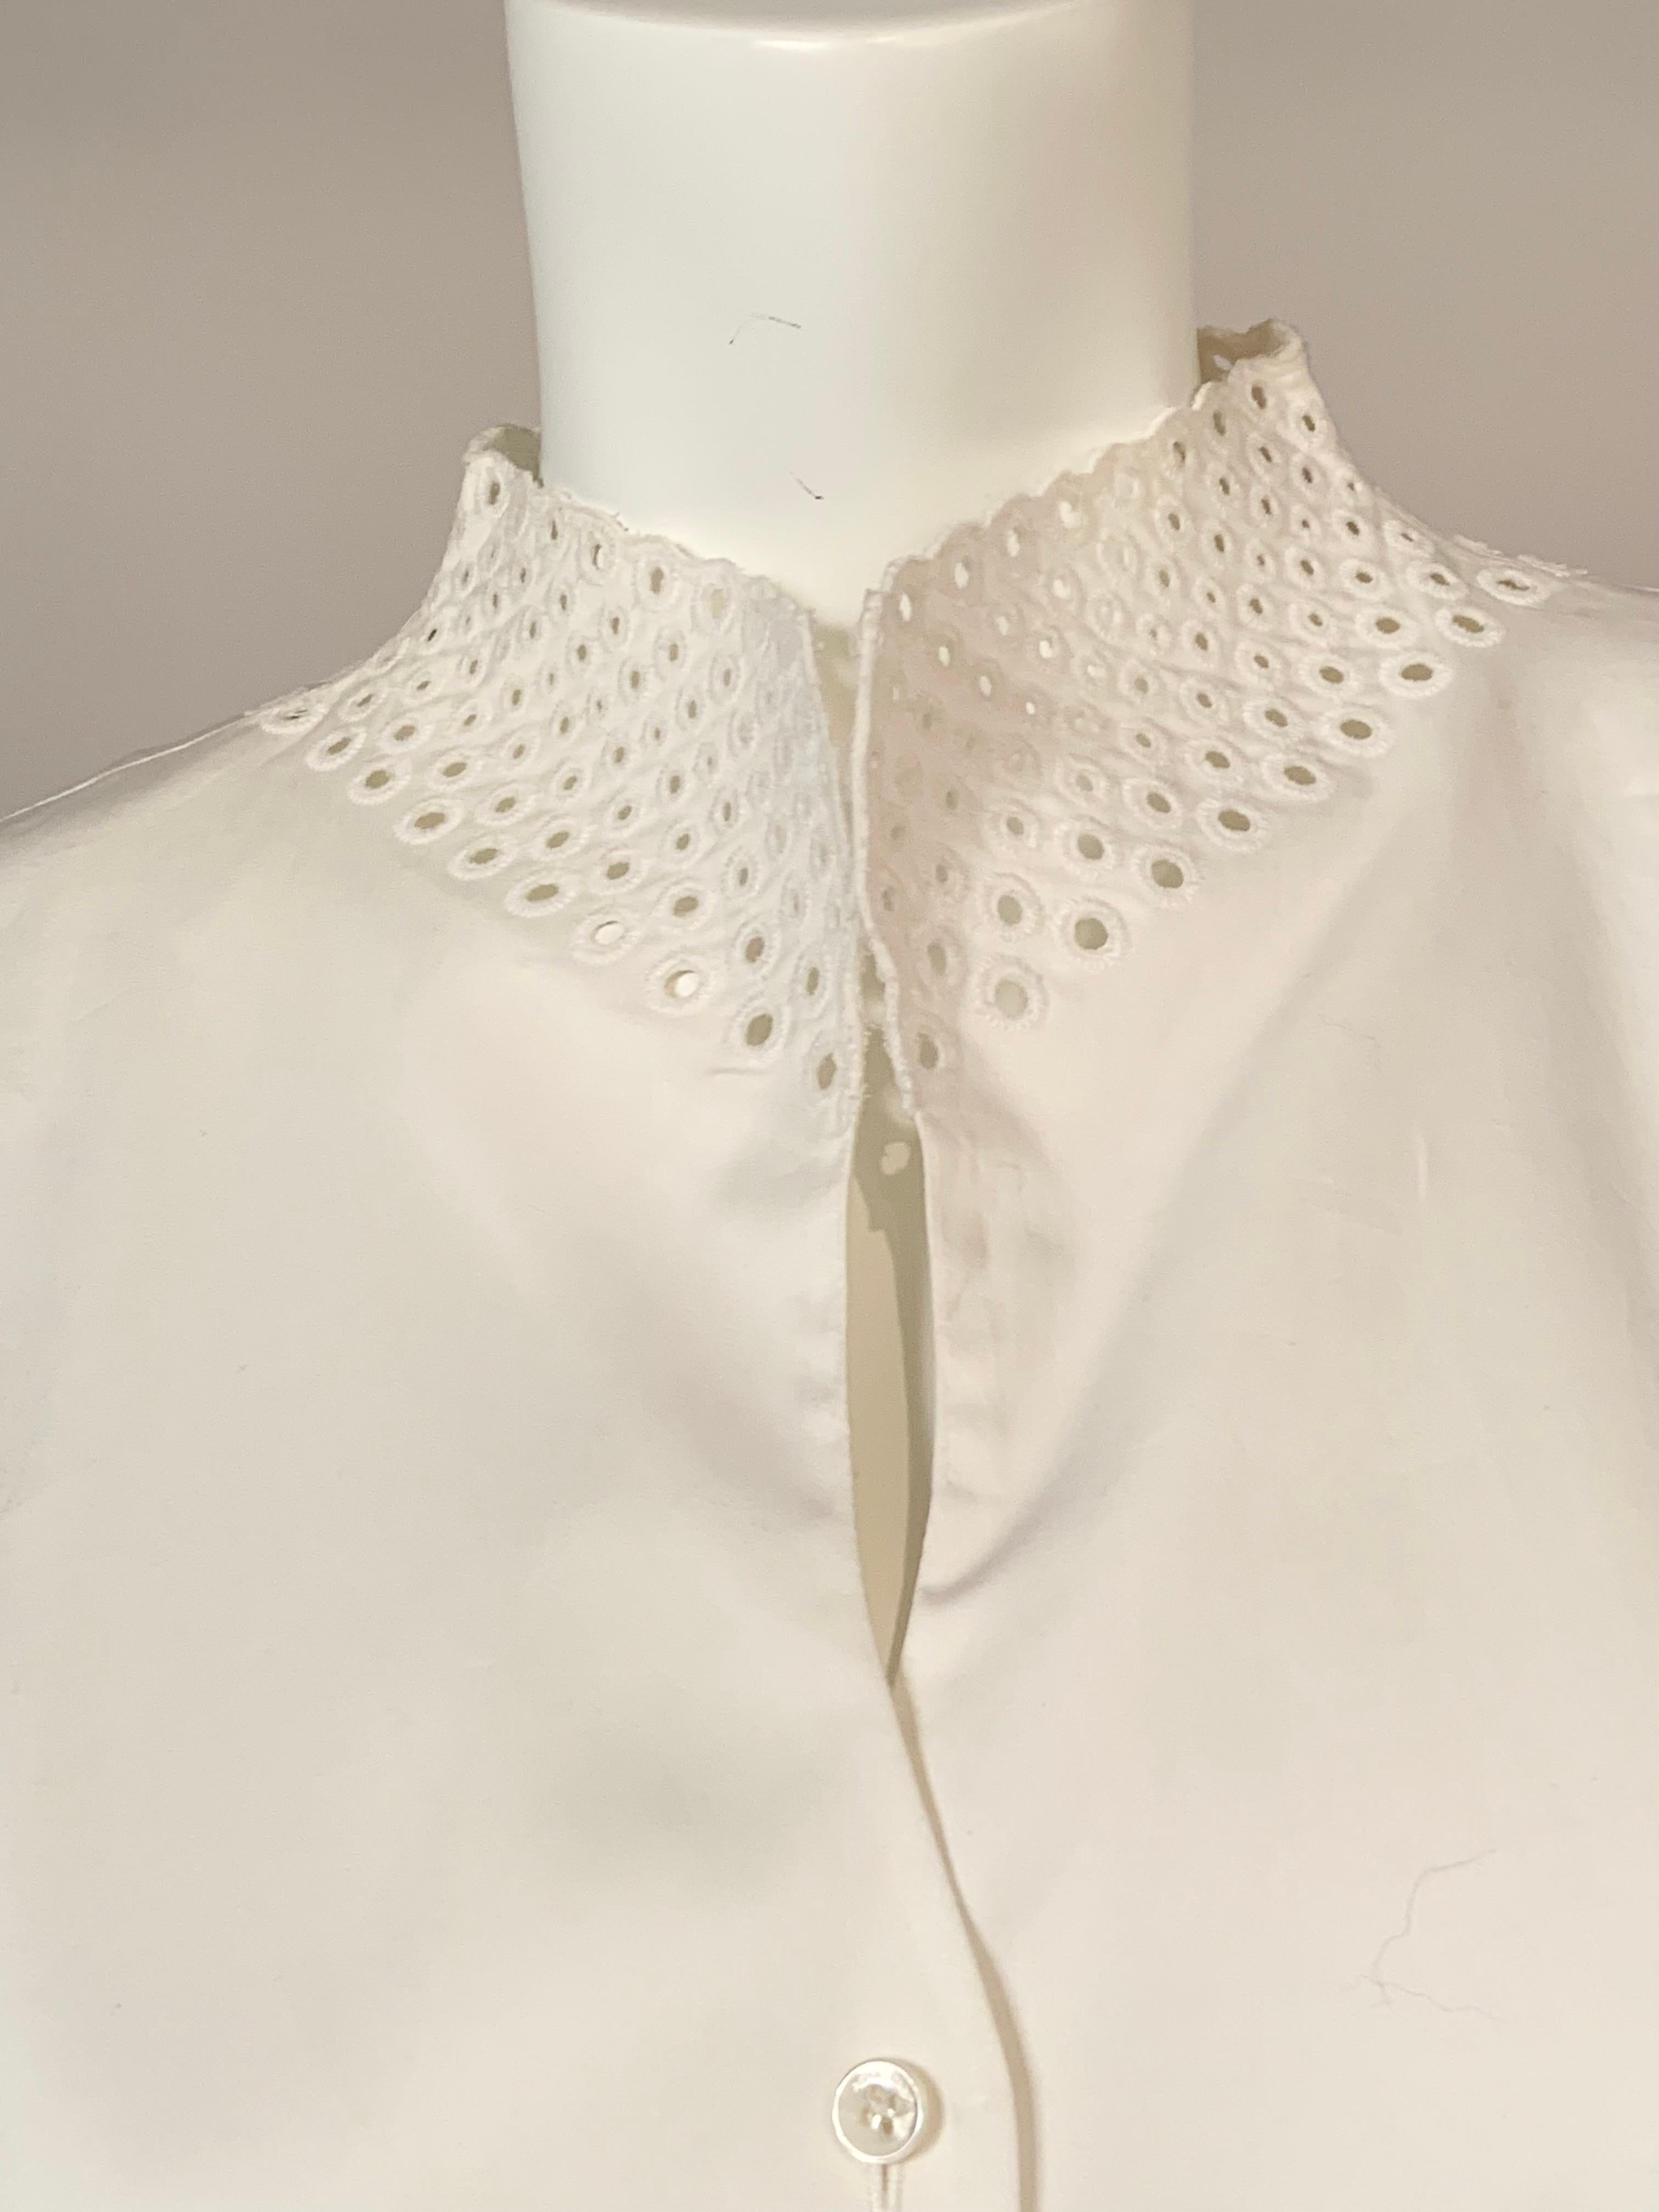 This feminine white cotton blouse from Rena Lange has cut work and embroidered details on the stand up collar and the sleeves.  The blouse has five buttons at the center front.  It bears the original hang tags and extra button and is in excellent